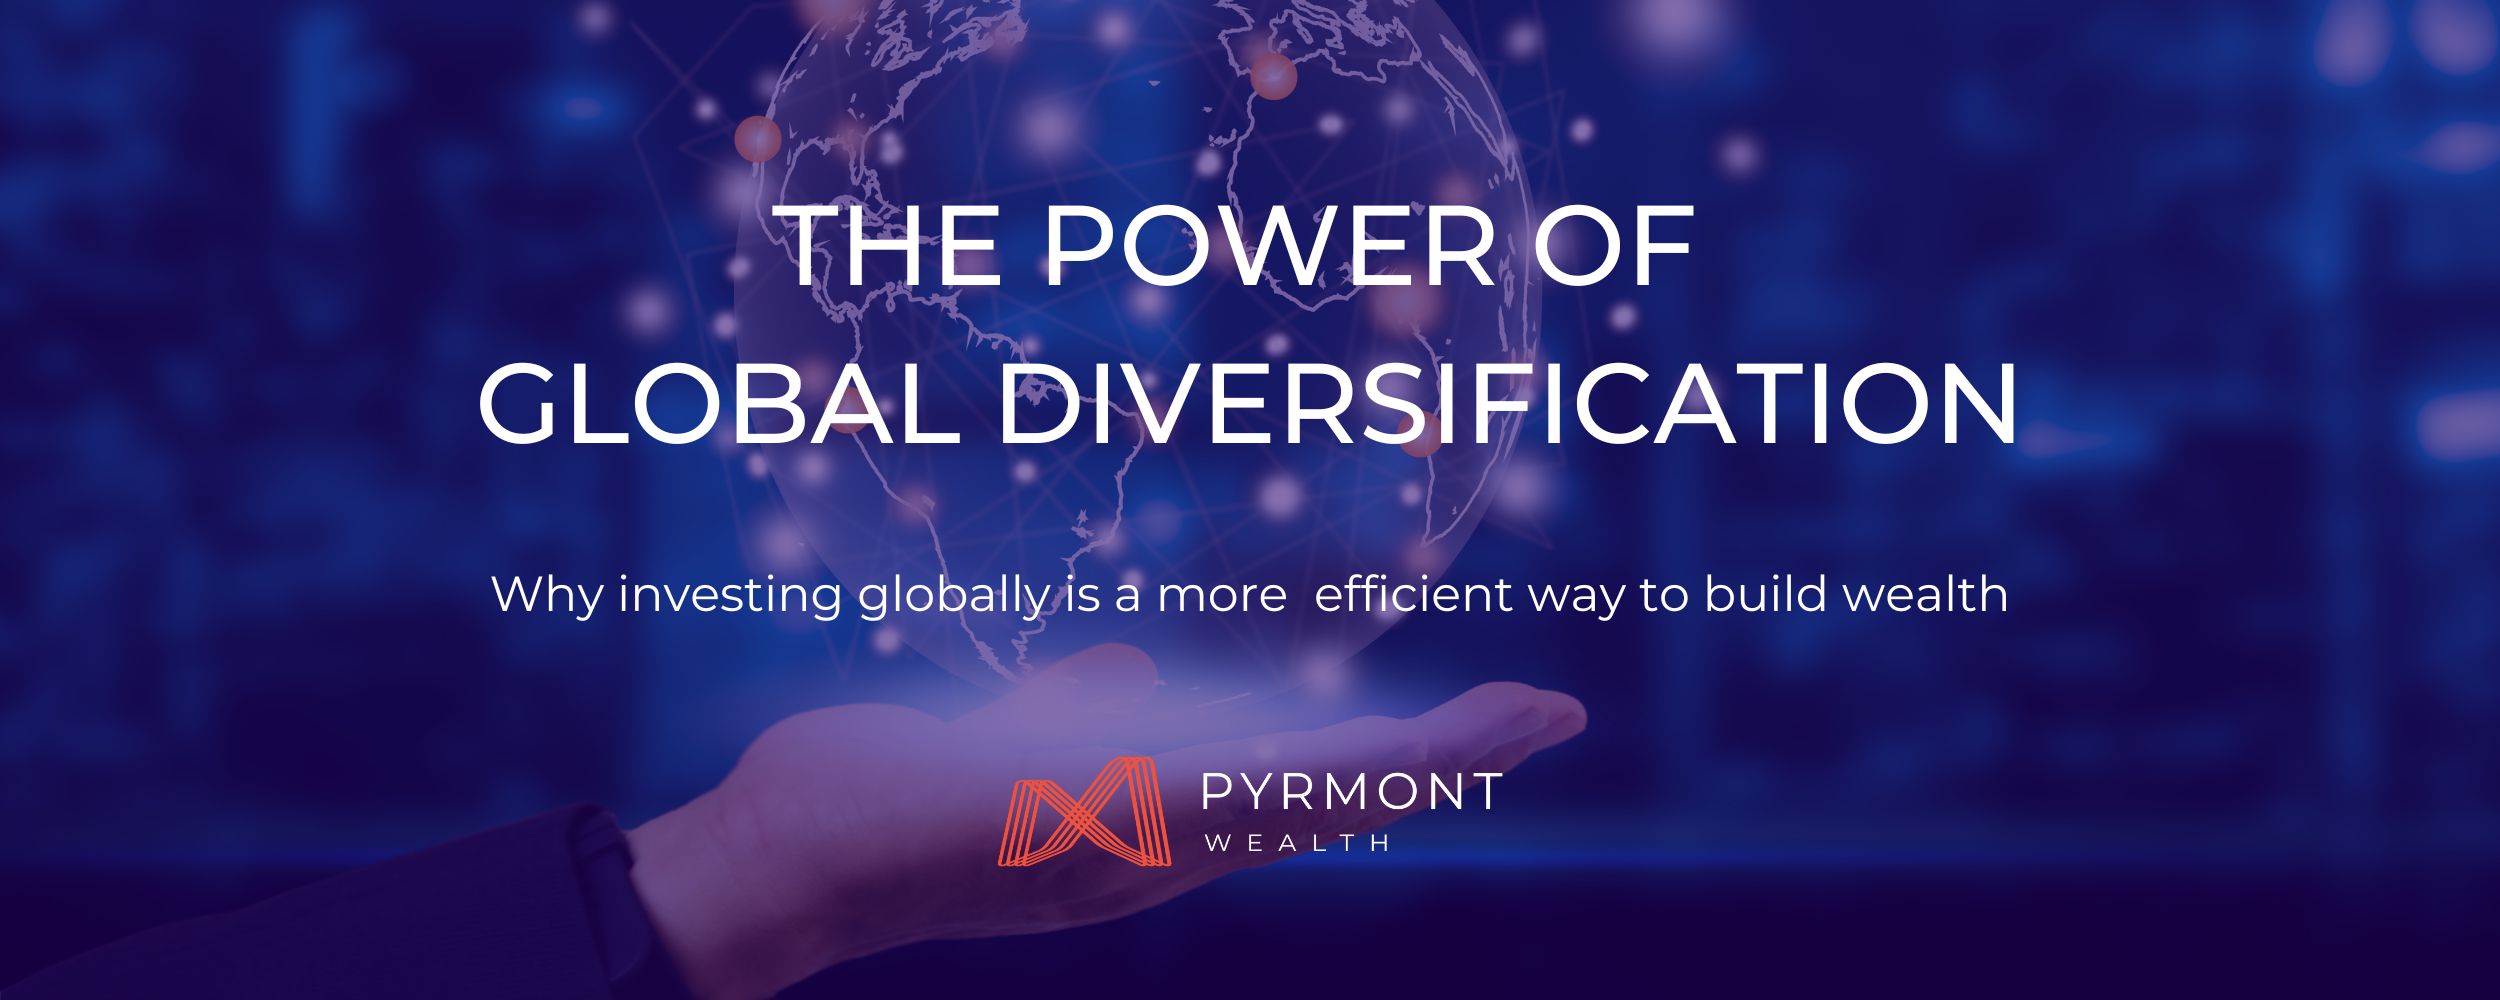 PWM- The power of global diversification